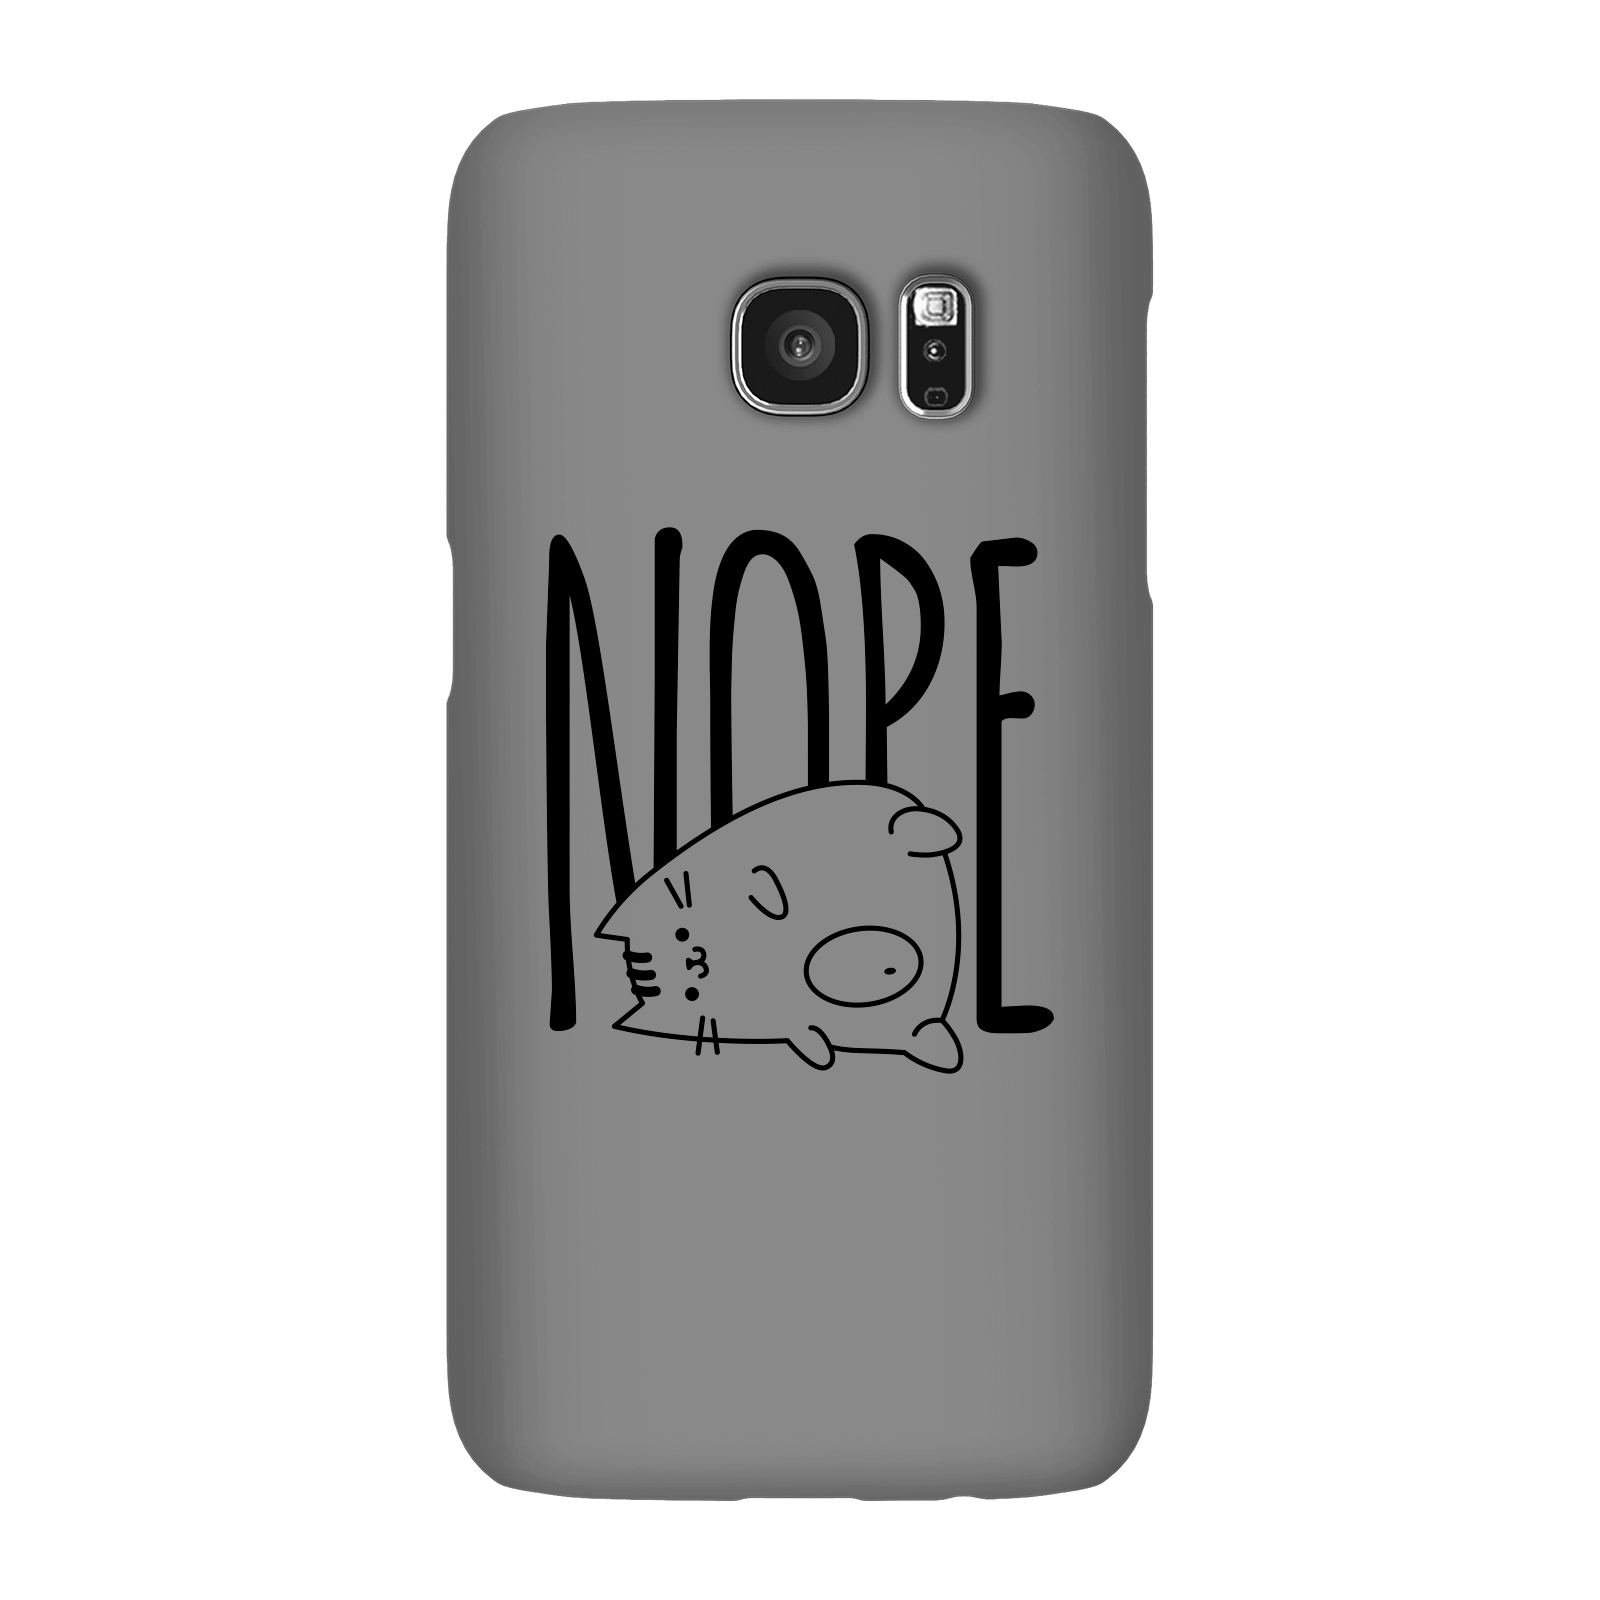 Nope Phone Case for iPhone and Android - Samsung S7 - Snap Case - Gloss